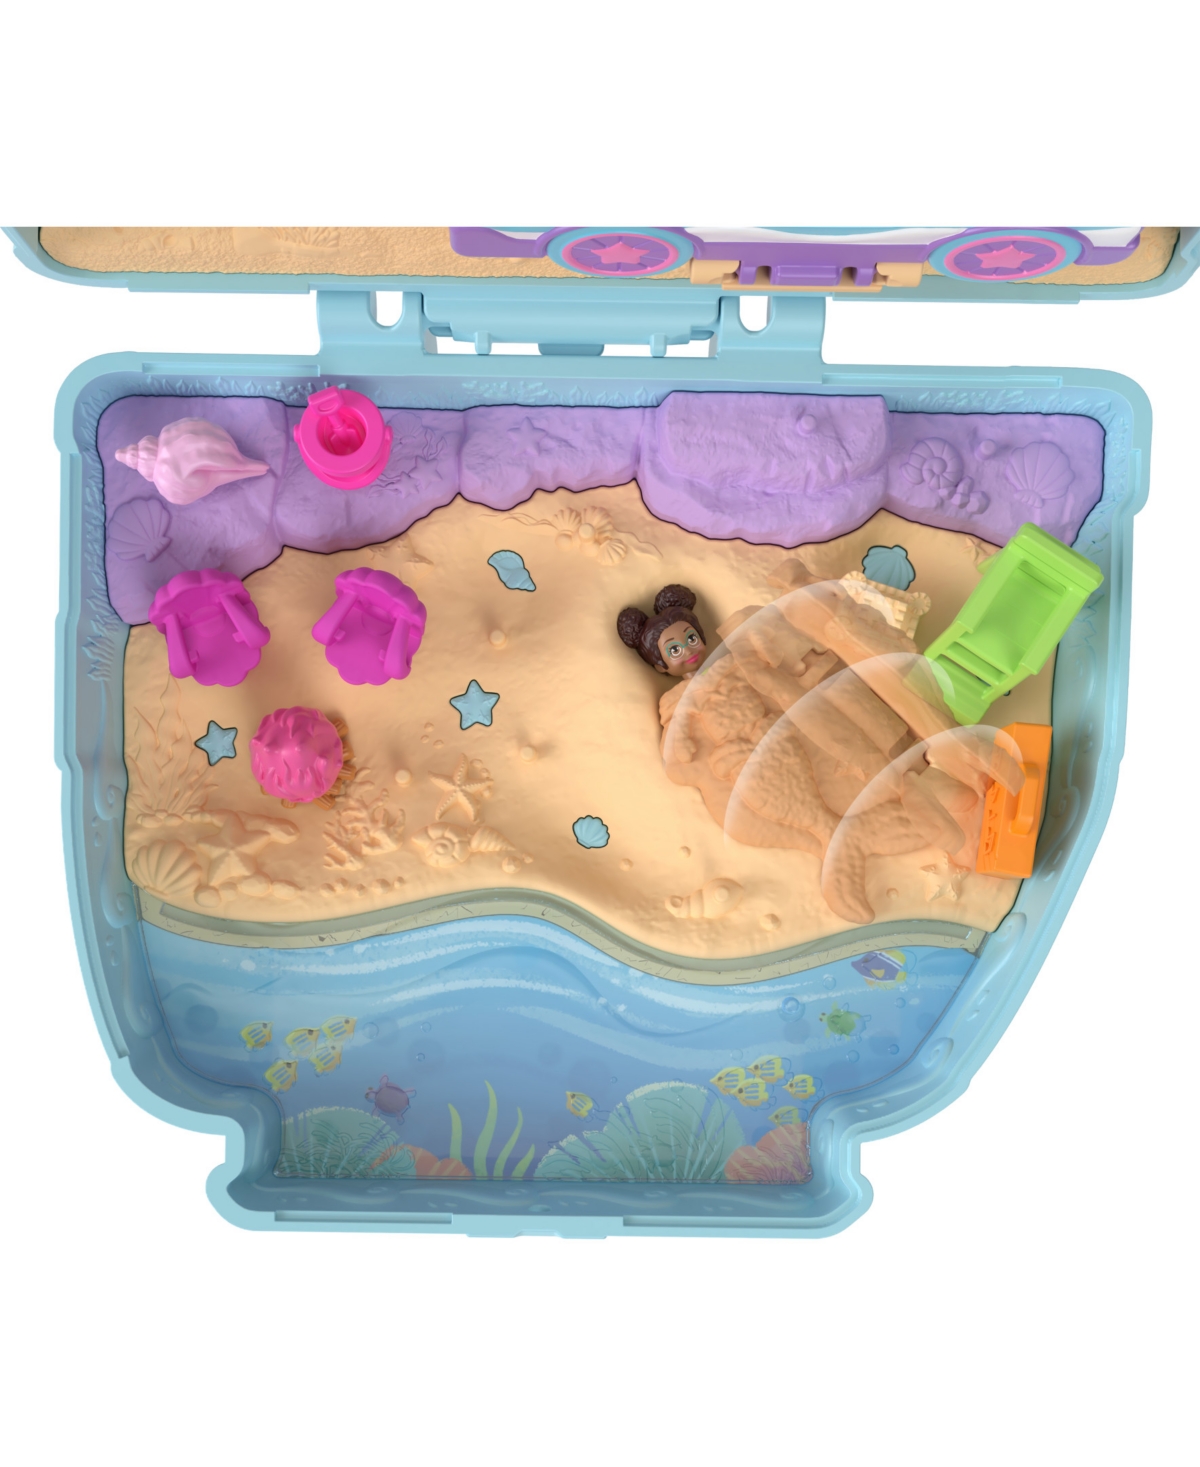 Shop Polly Pocket Dolls And Playset, Travel Toys, Seaside Puppy Ride Compact In No Color